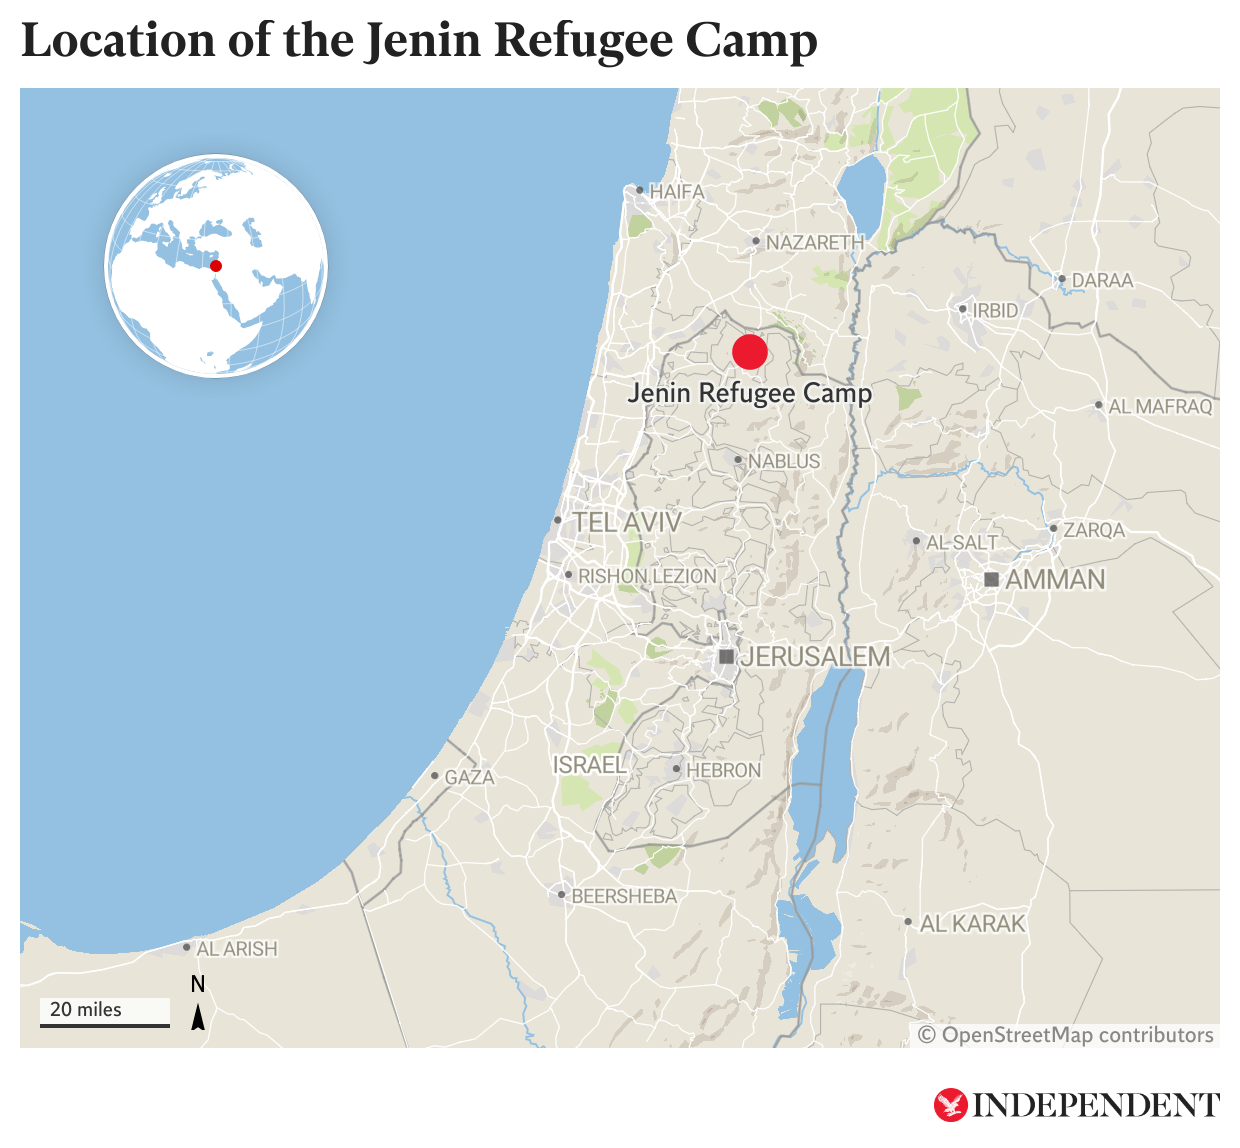 A map to show the location of the Jenin refugee camp